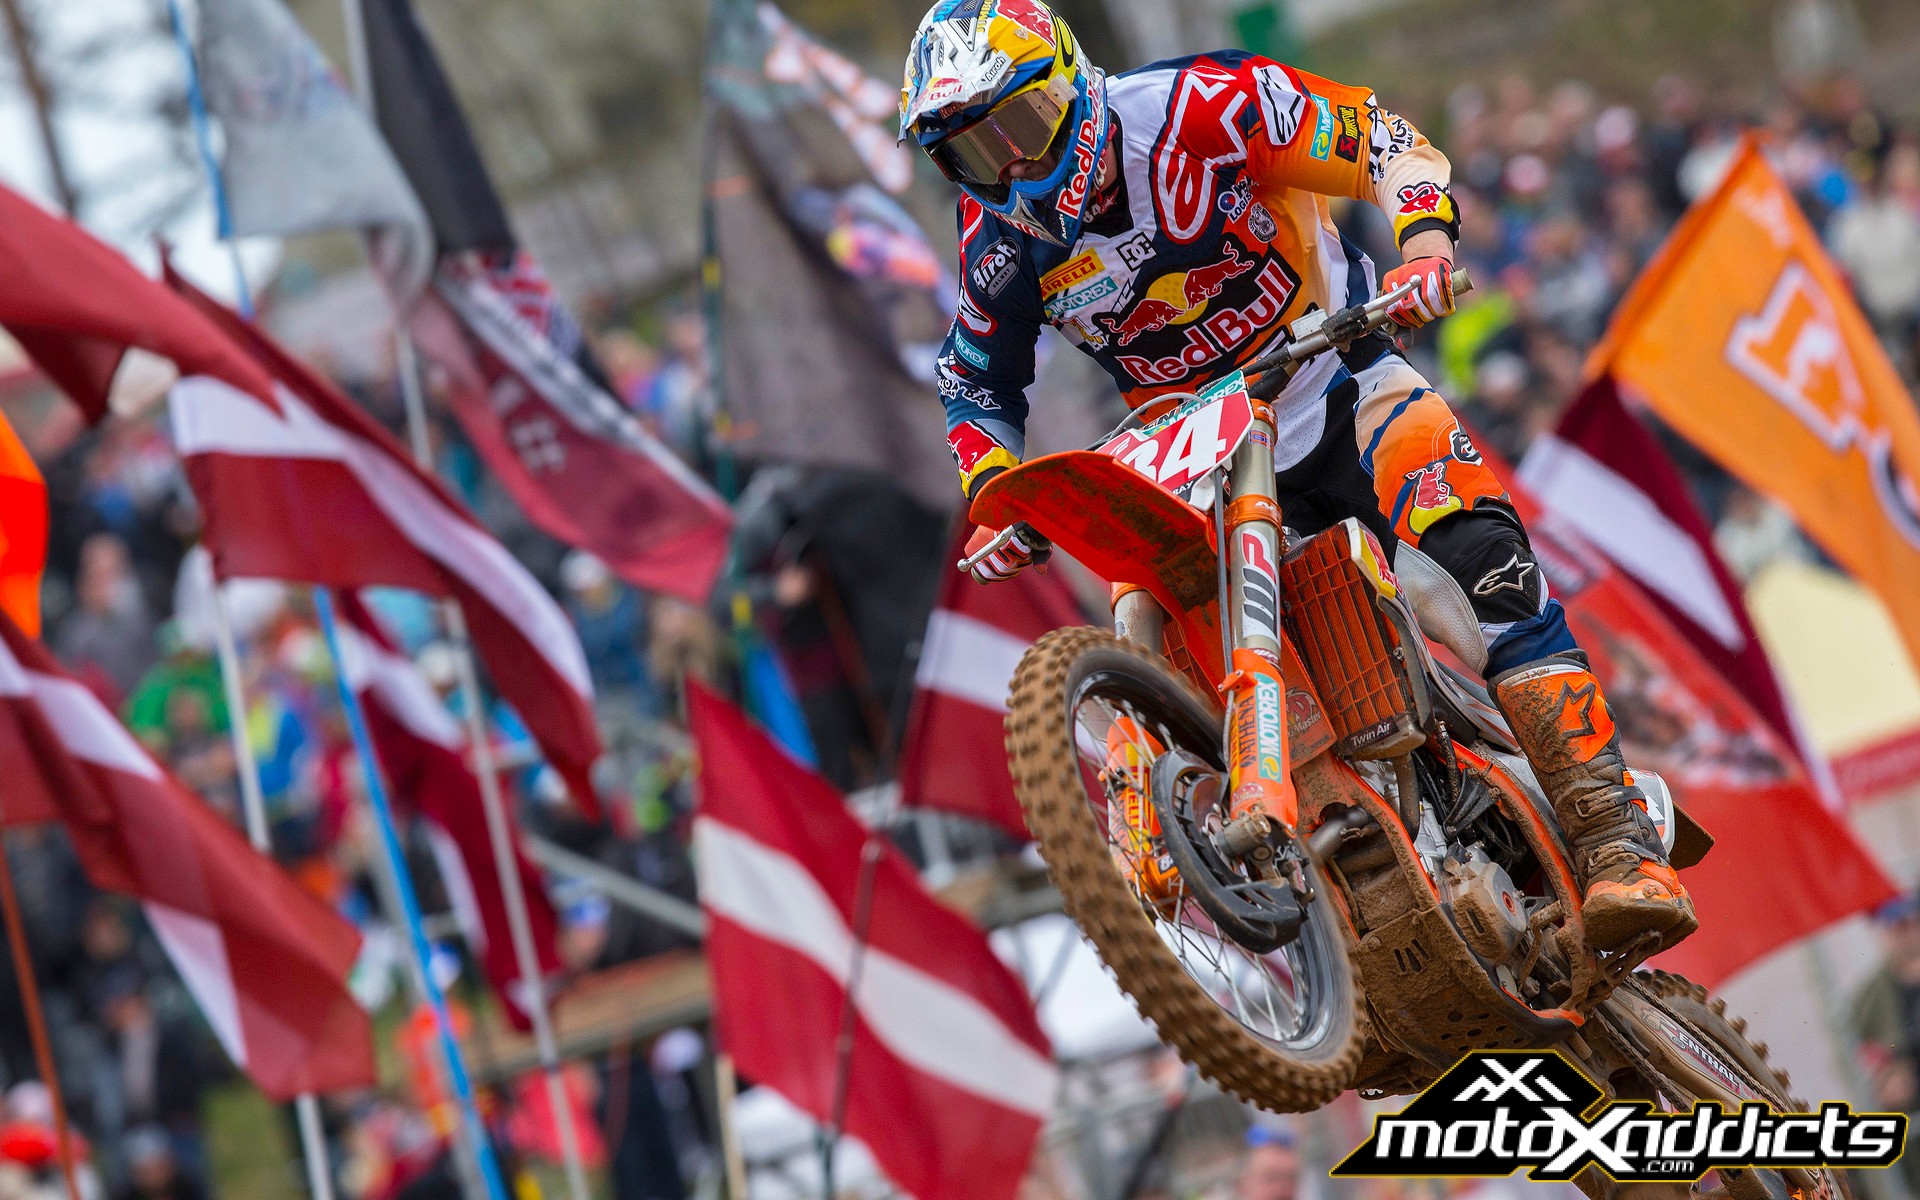 Jeffrey is perfect so far in 2016. 6 for 6 in qualifying races and 12 for 12 in MX2 motos. 